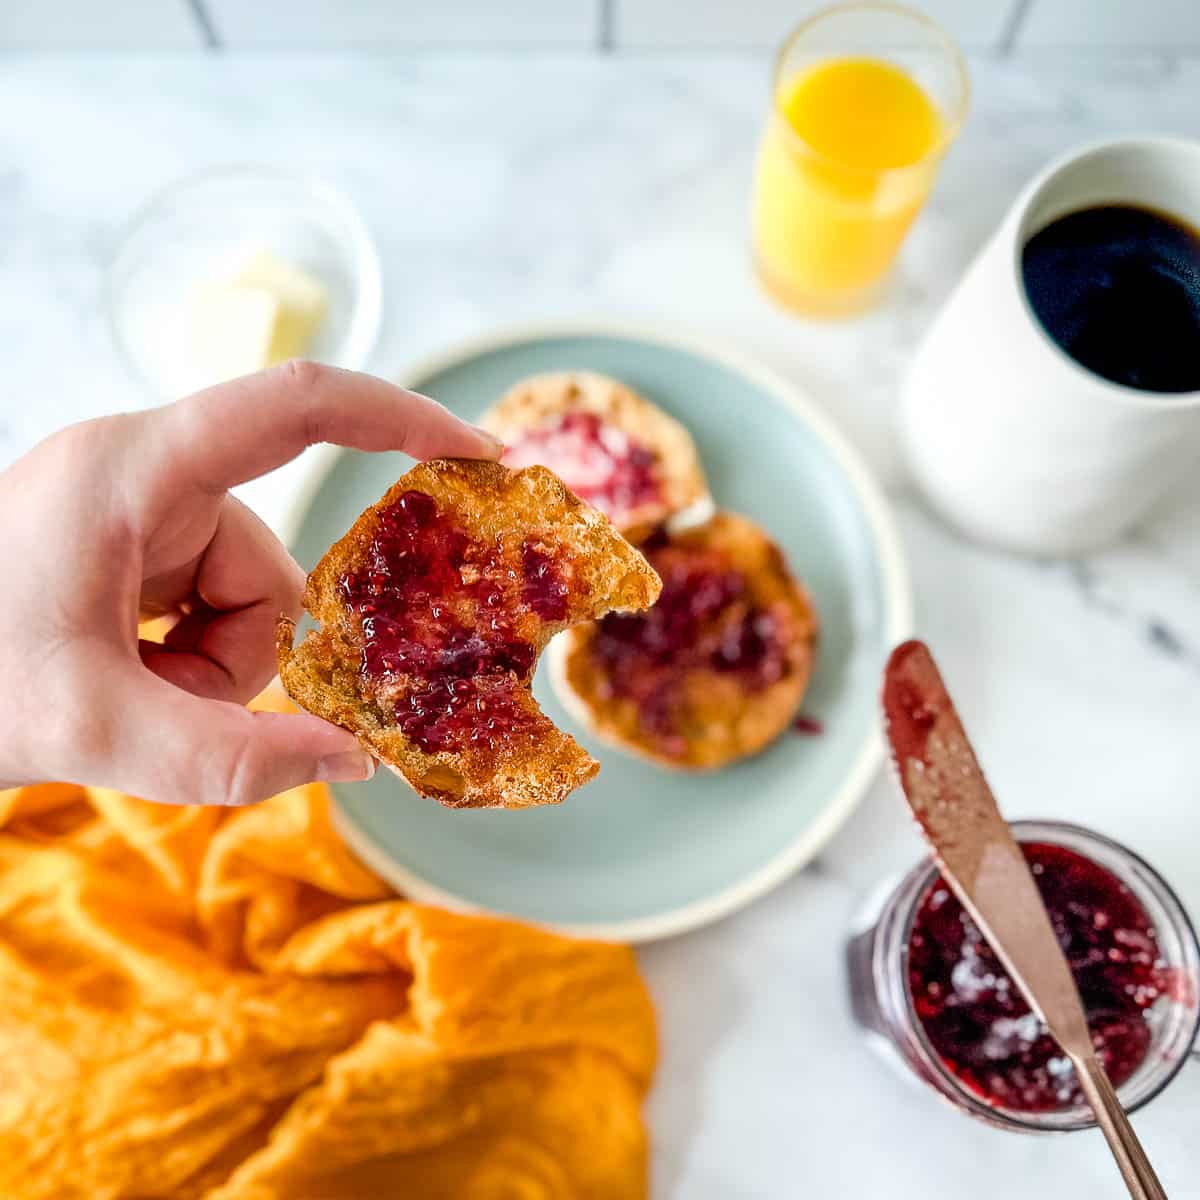 An English muffin with a bite taken out of it is held over a scene with a blue plate, a yellow linen, jam, a knife, coffee, and orange juice.